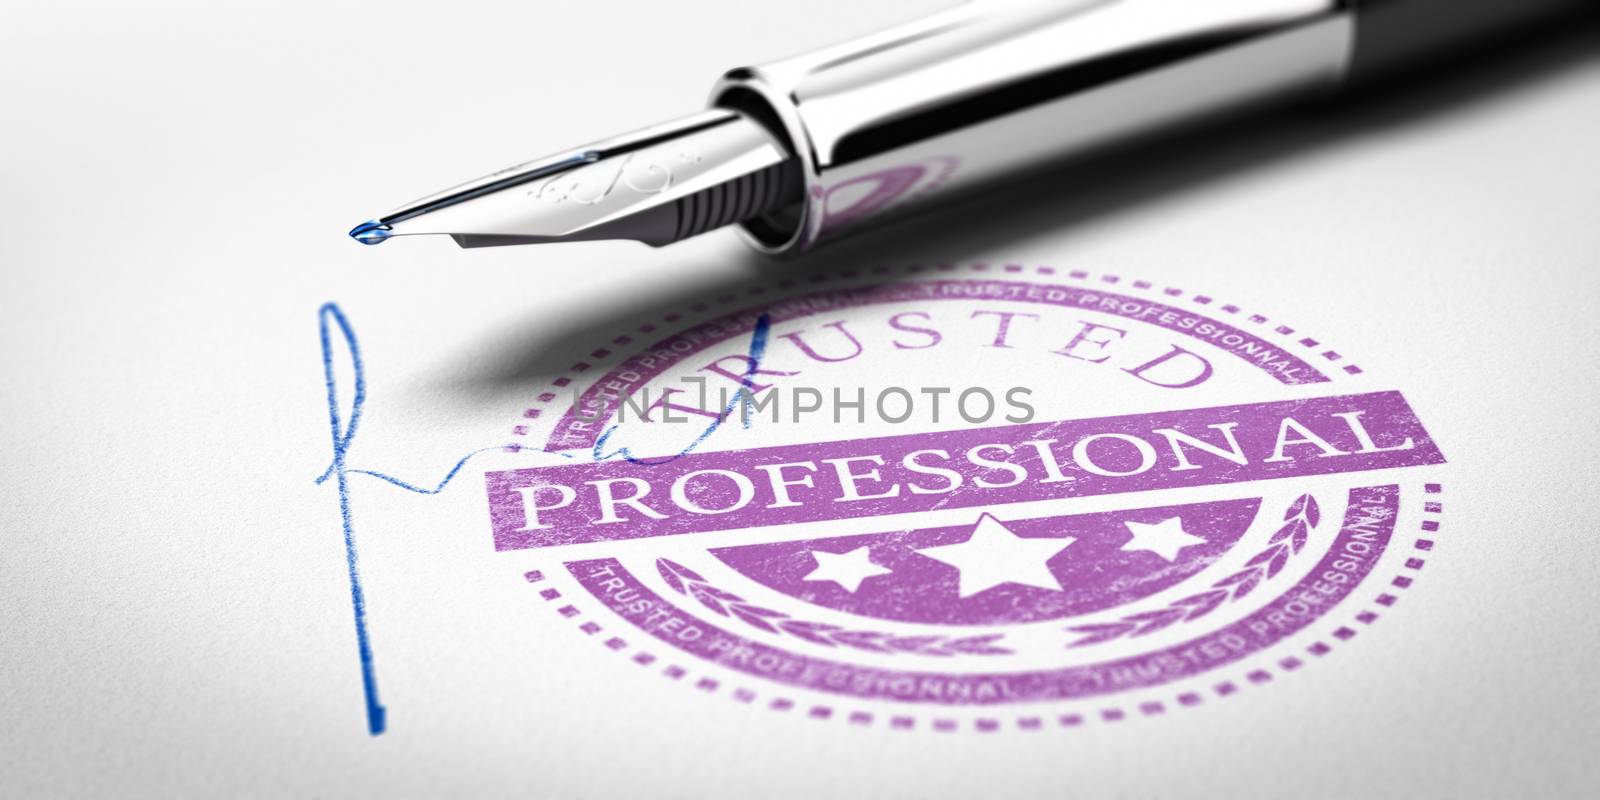 Trusted Professionnal rubber stamp mark imprinted on a paper texture with signature and fountain pen. Concept image for illustration of trustworthy business partner.